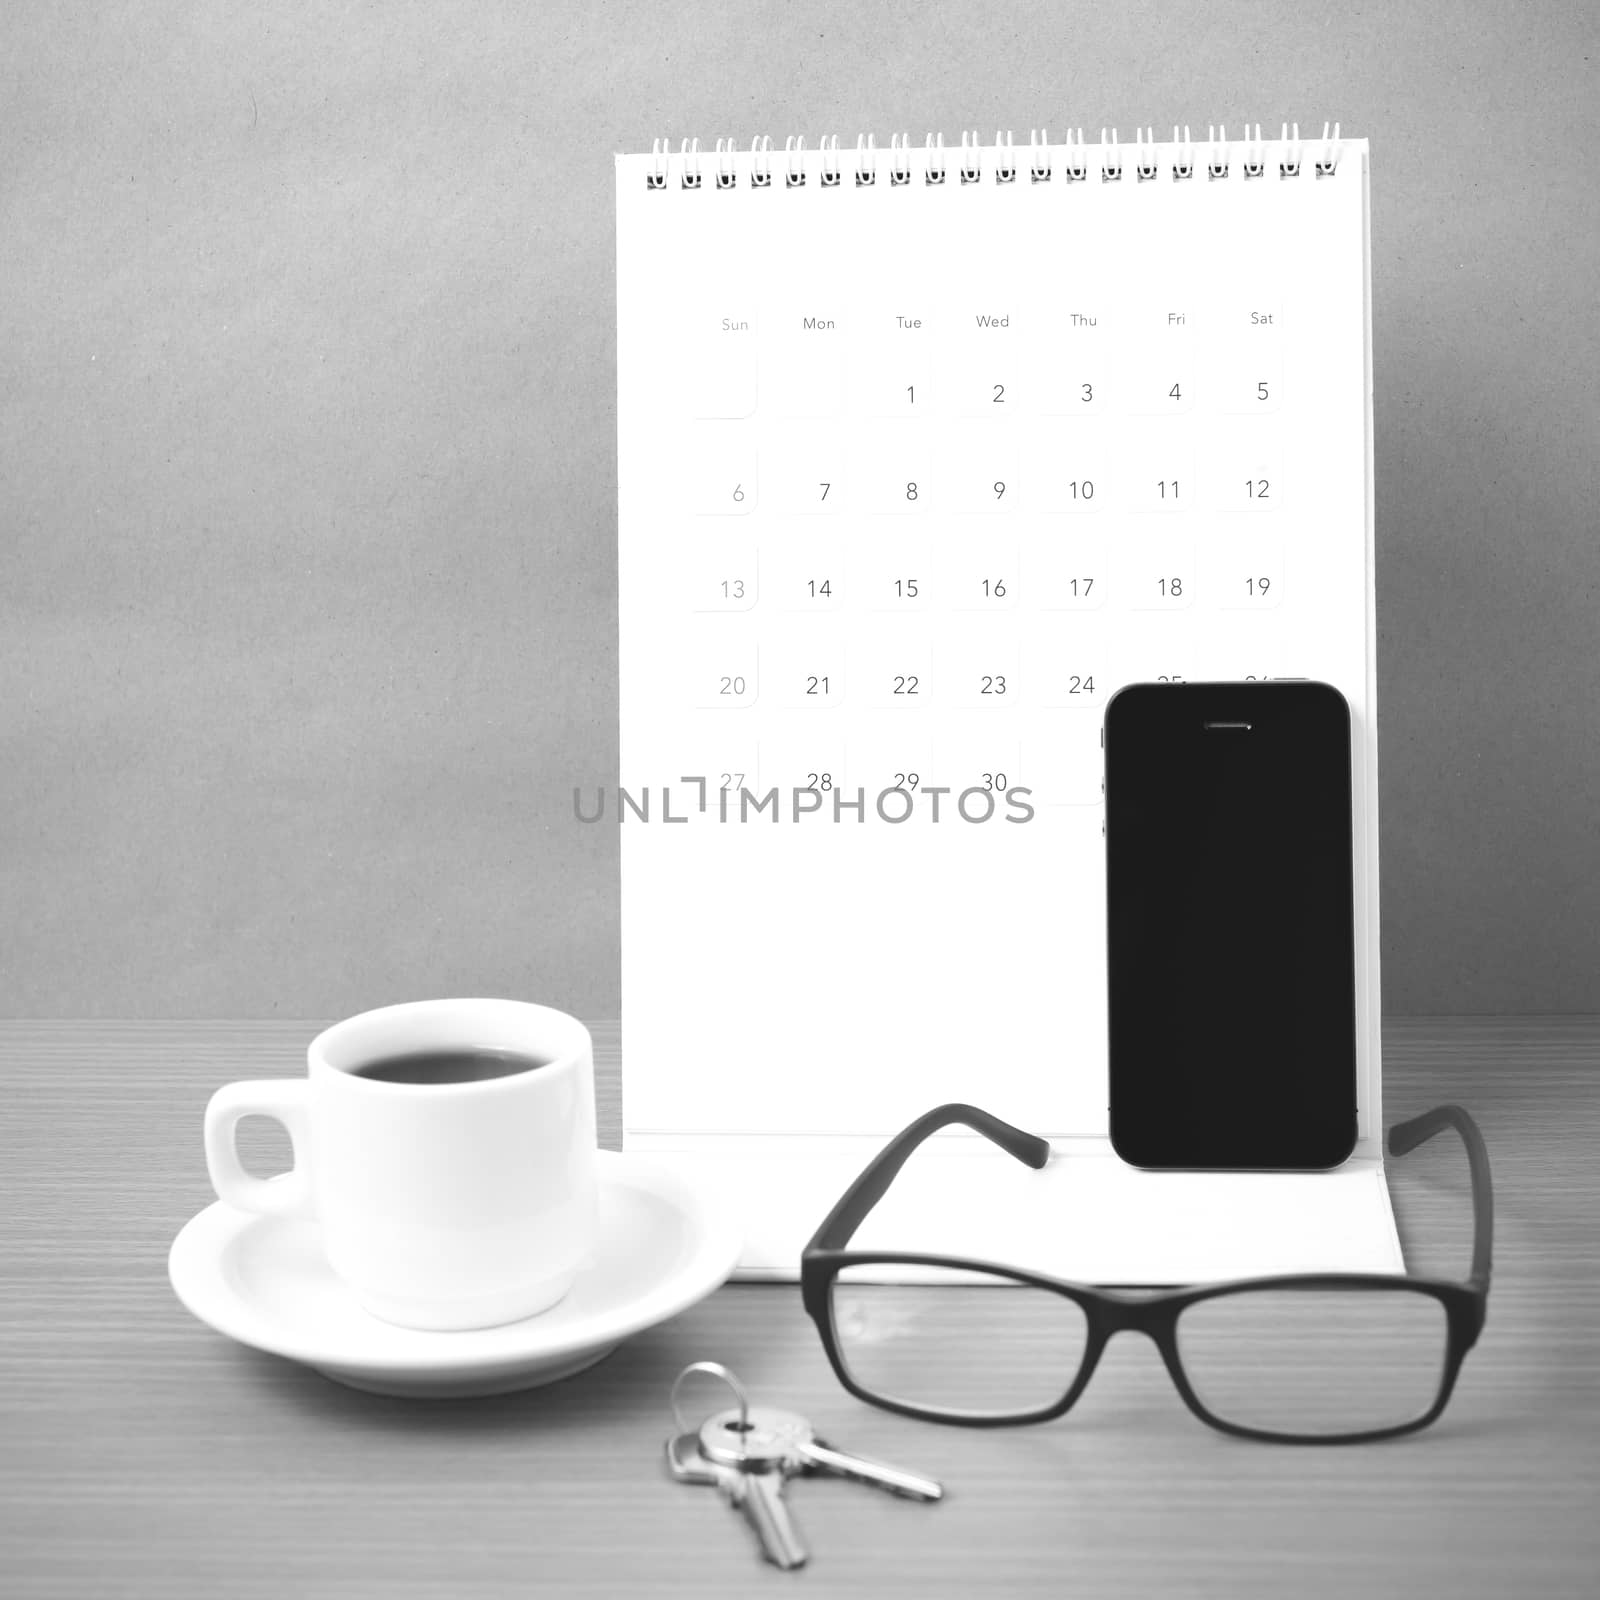 coffee,phone,eyeglasses,calendar and key on wood table background black and white color